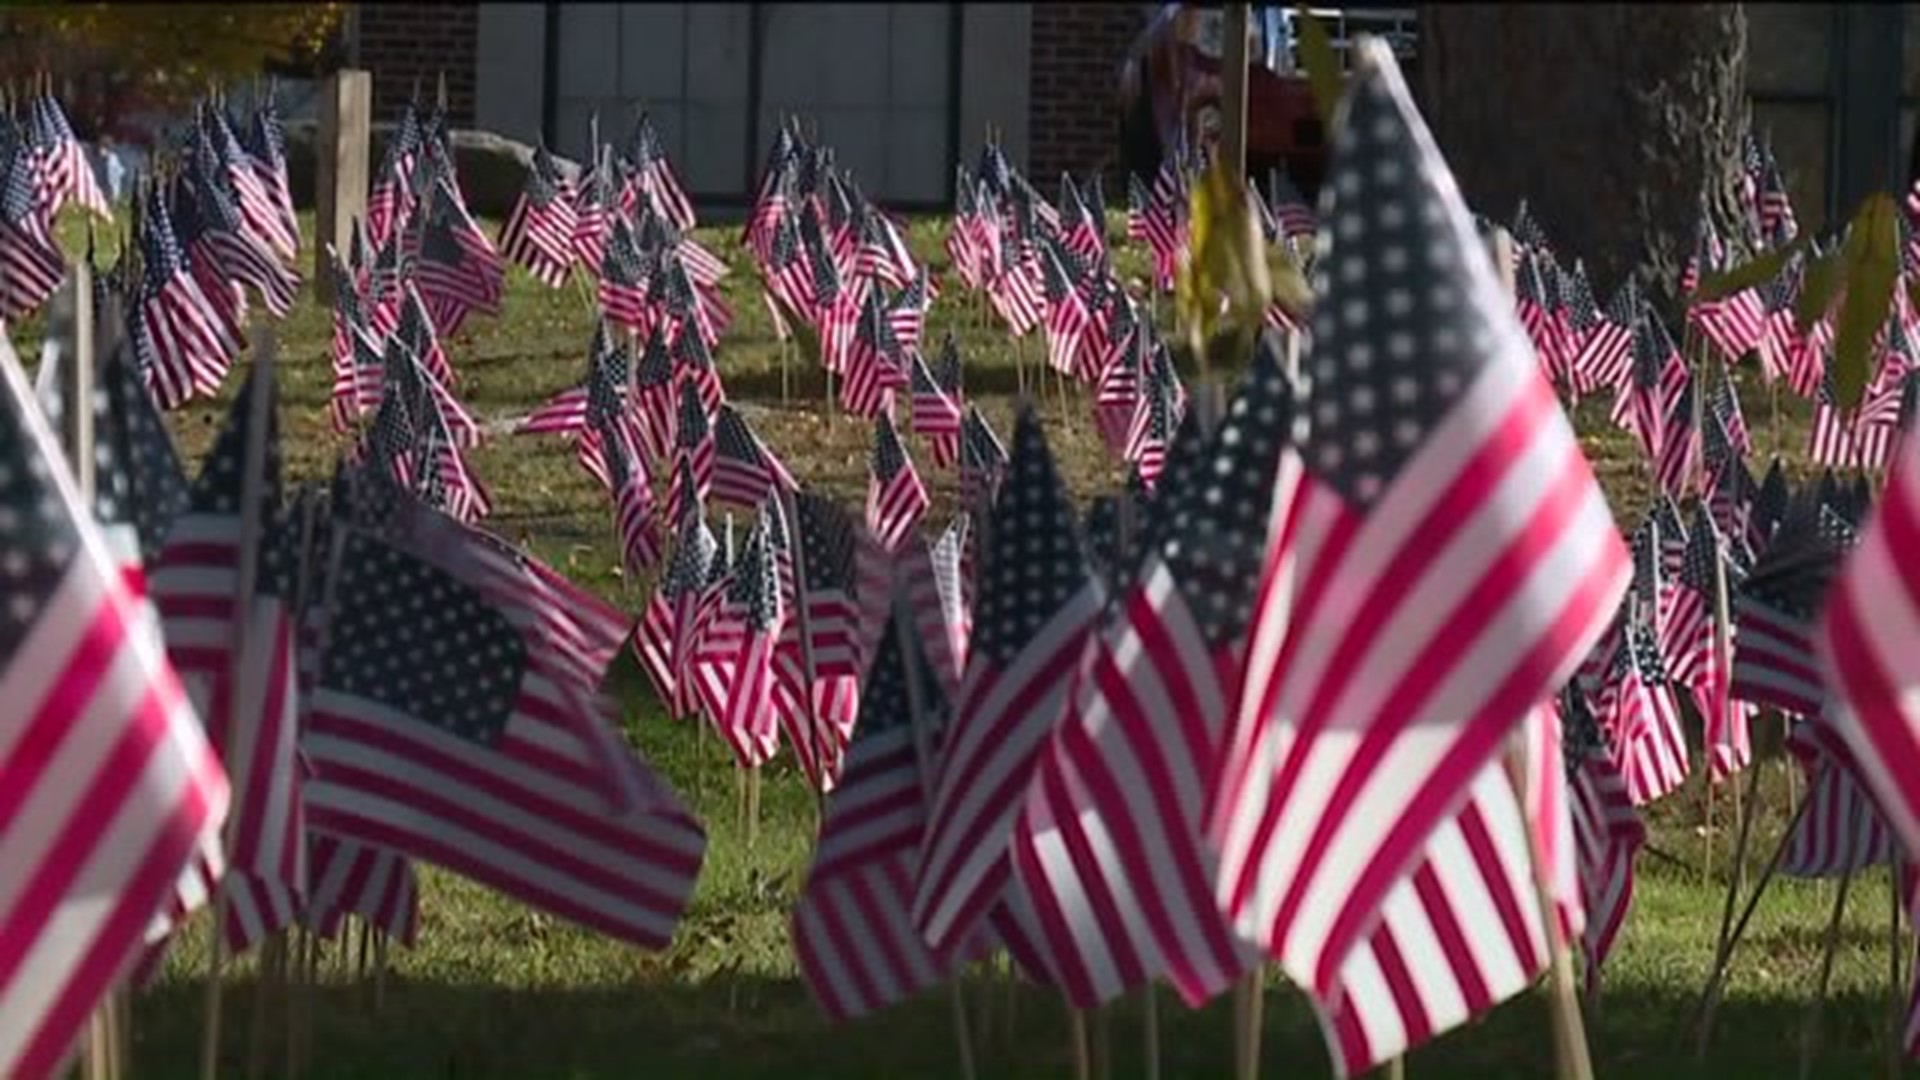 Thousands of Flags Fly at Marywood, Remembering Lives Lost